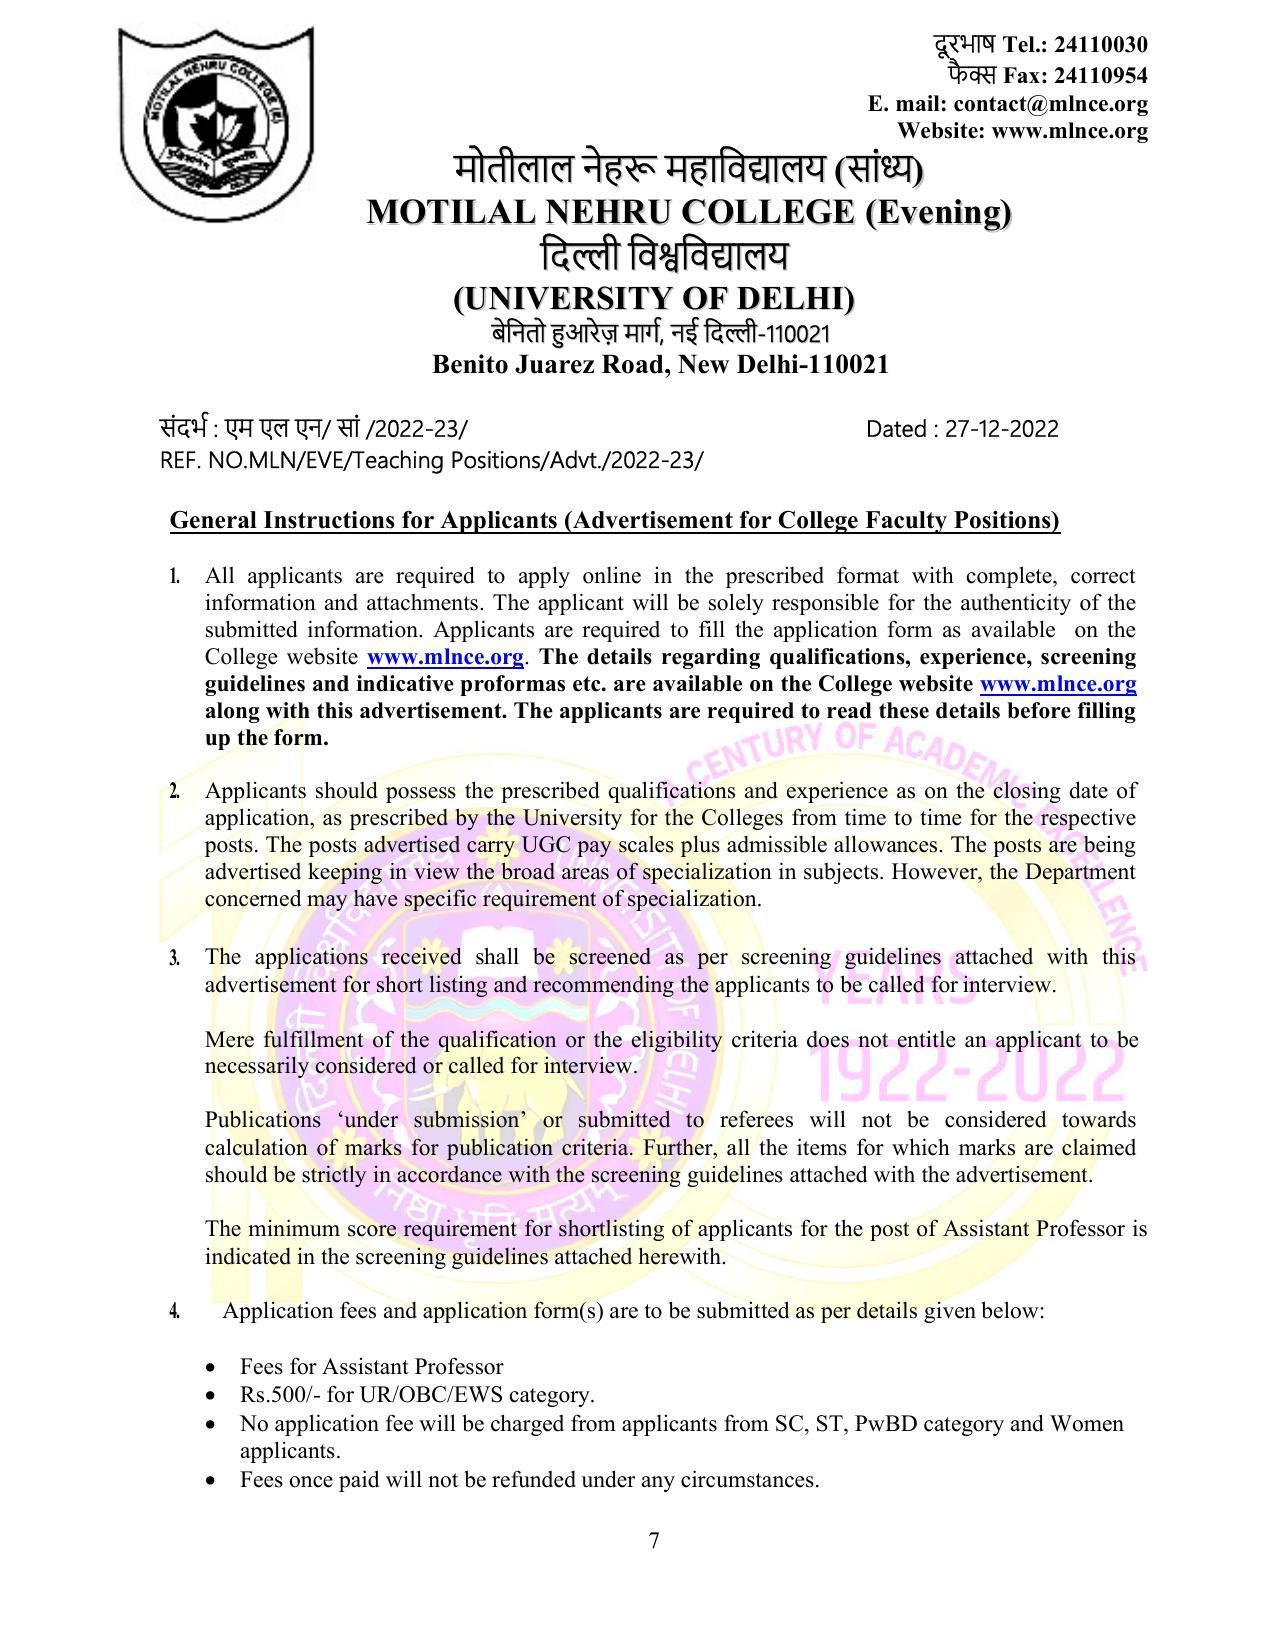 Motilal Nehru College (Evening) Invites Application for 75 Assistant Professor Recruitment 2022 - Page 10